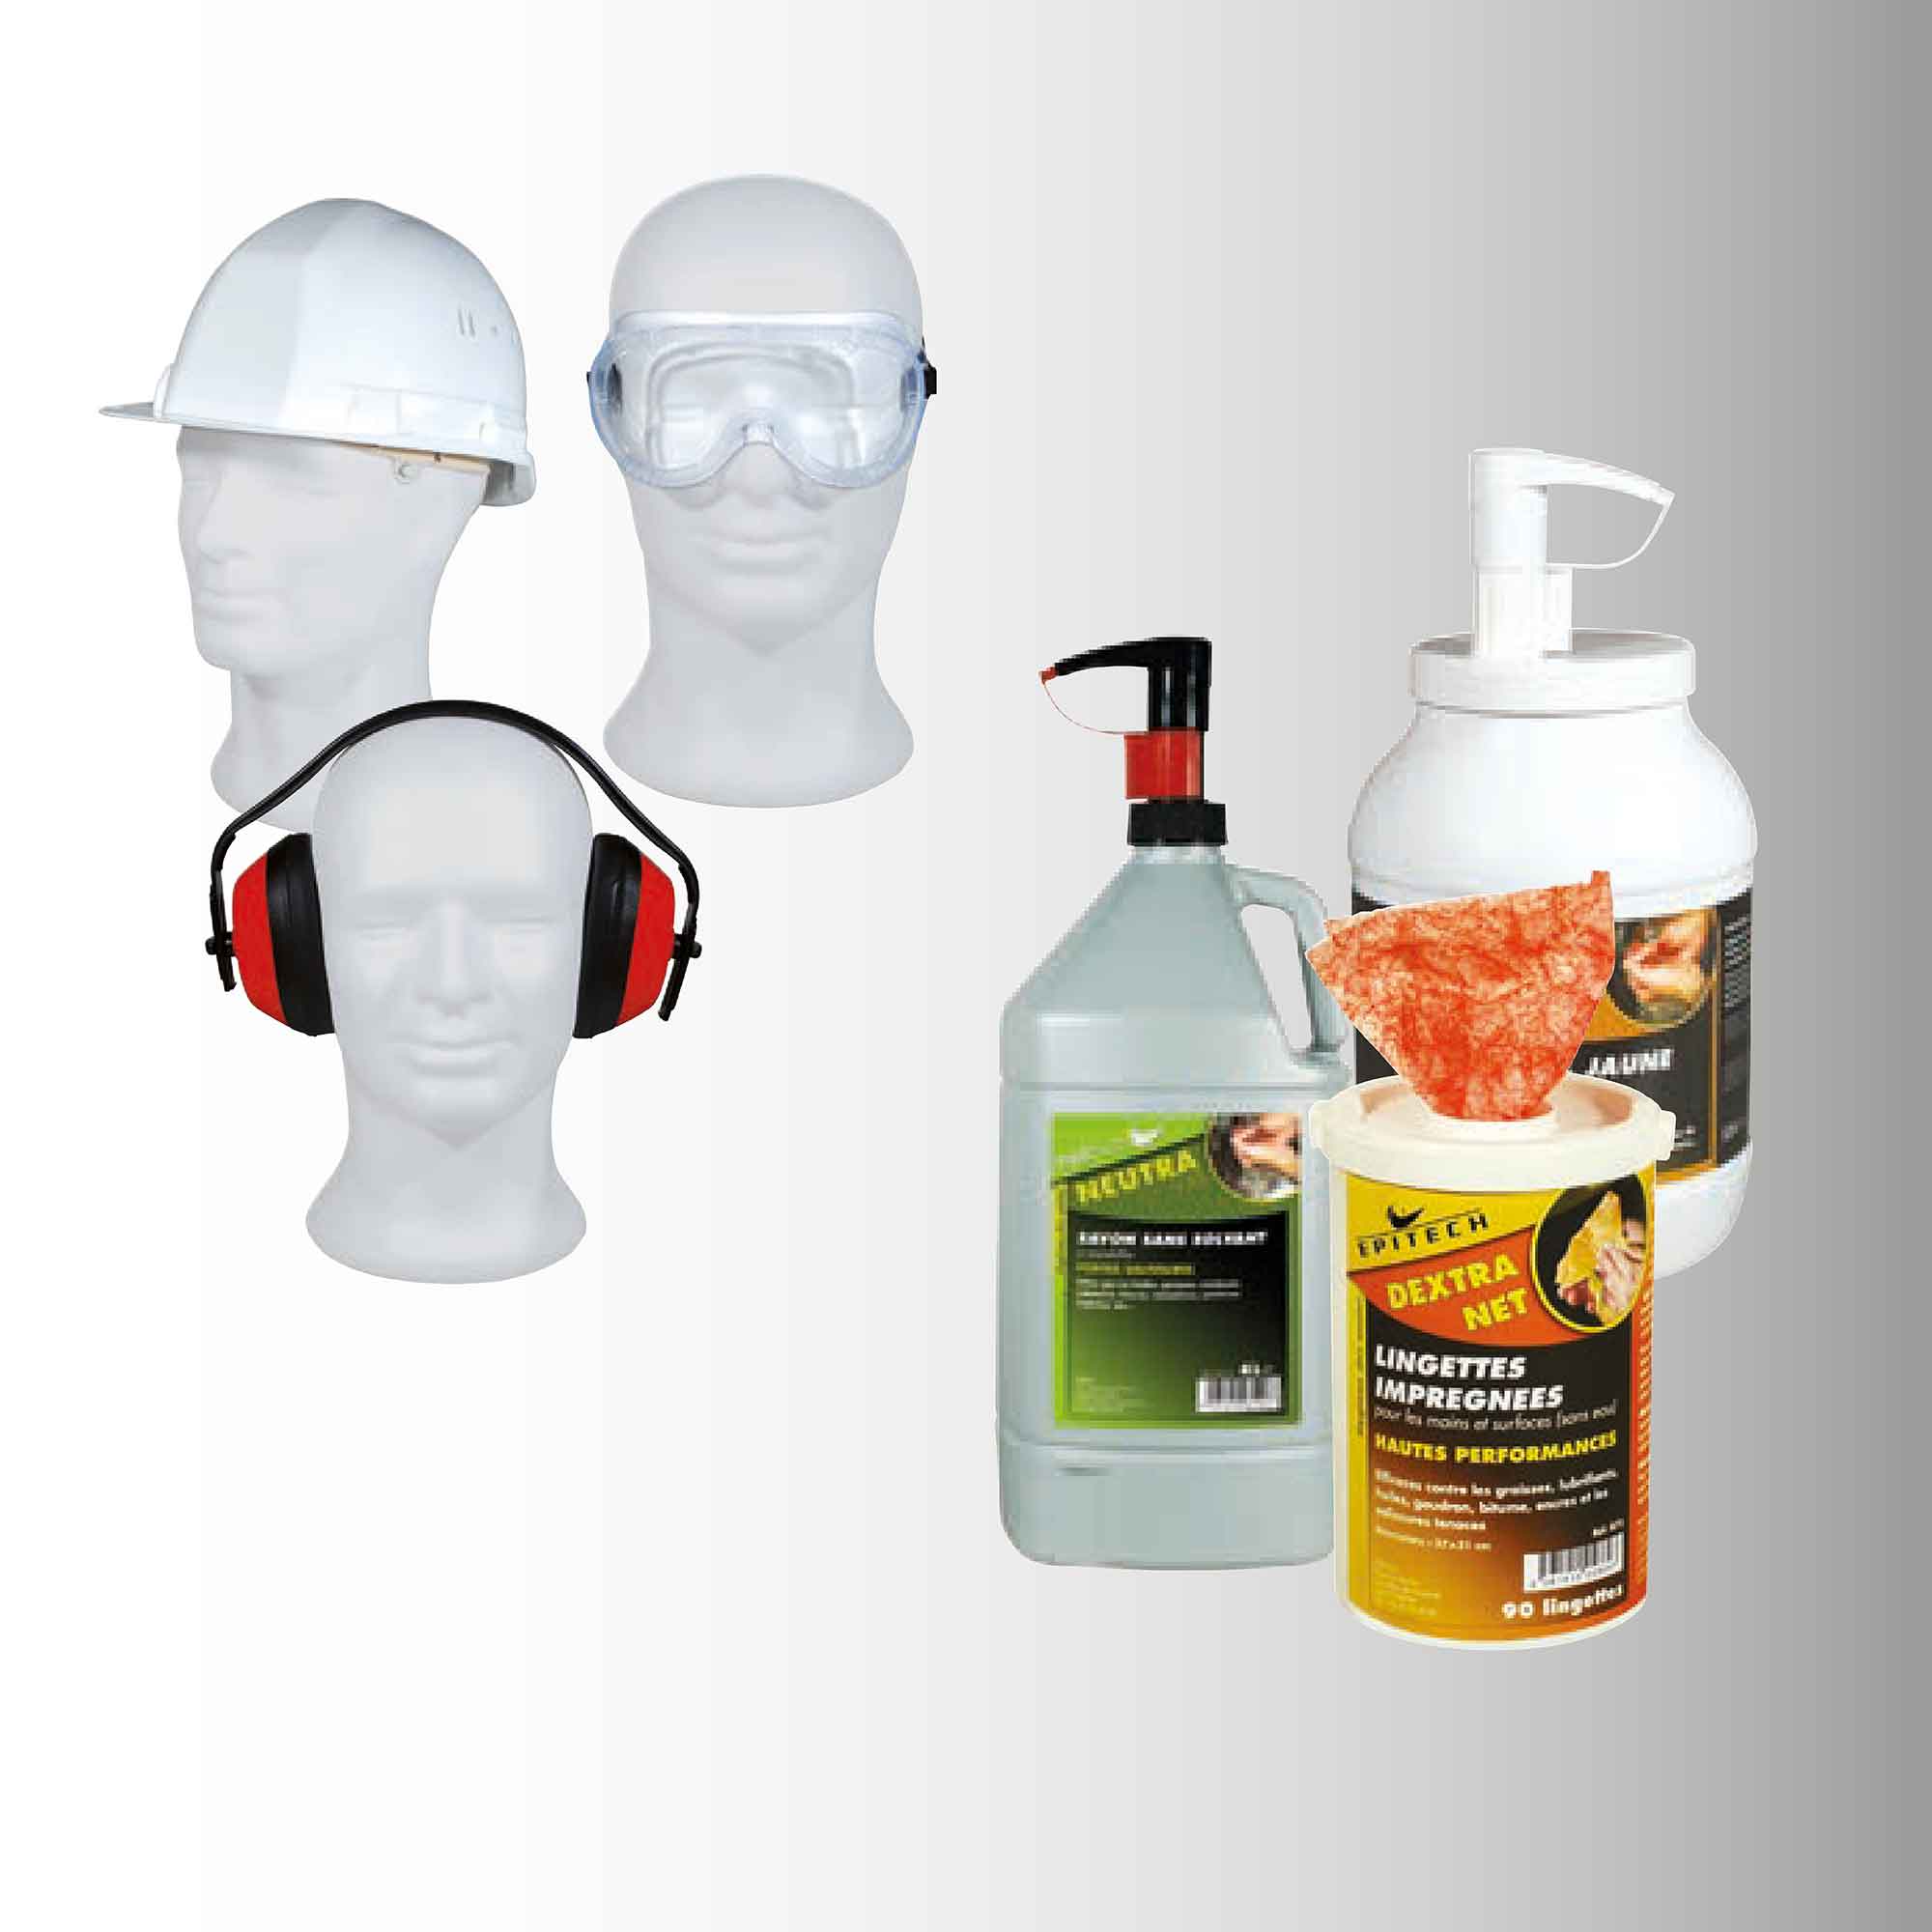 thard-protection-chantier-personne-hygiene